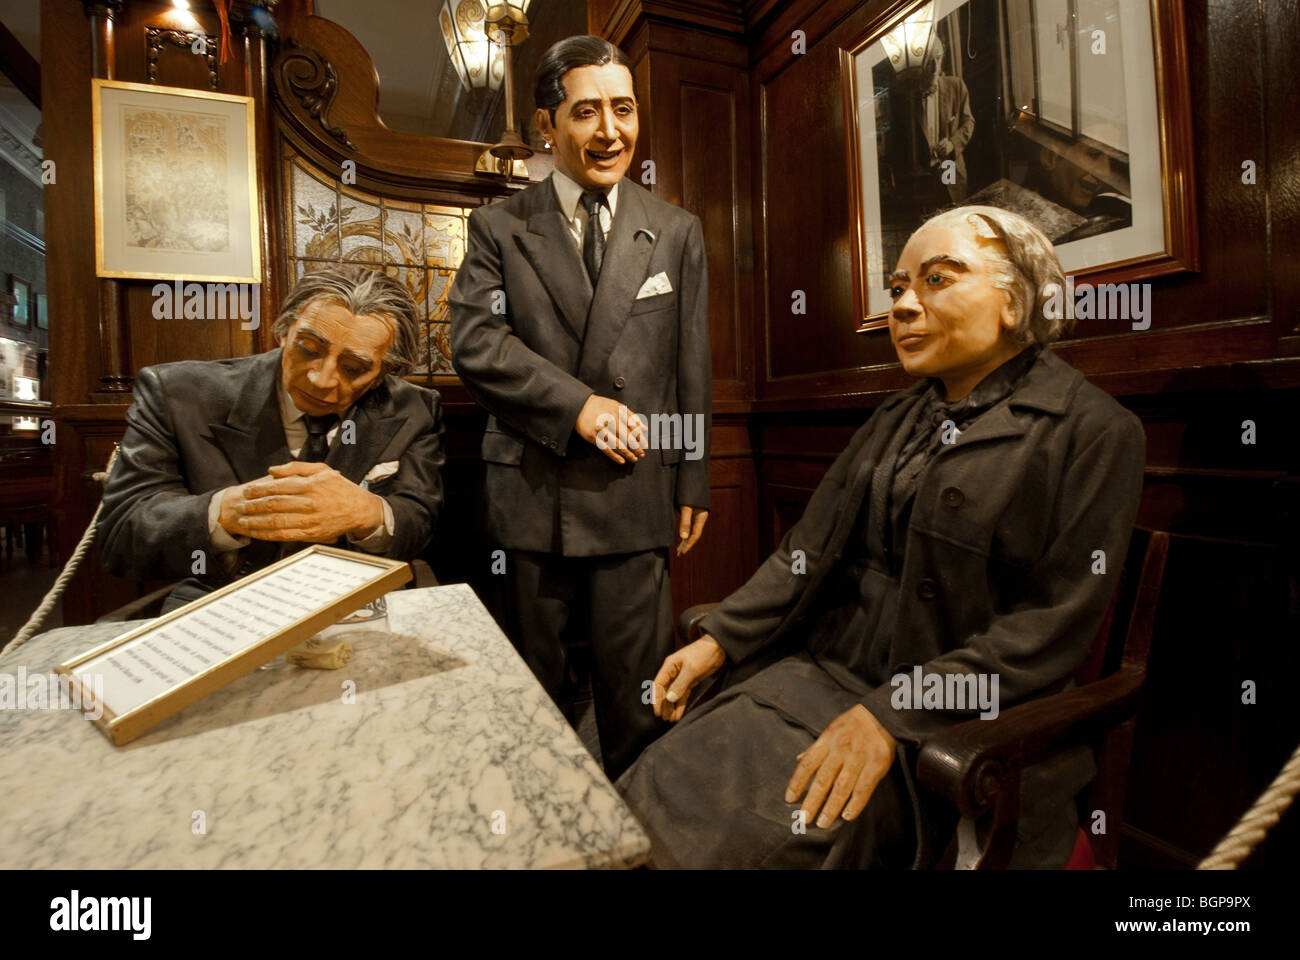 Sculpture models of famous clients in Cafe Tortoni, Buenos Aires, Argentina Stock Photo